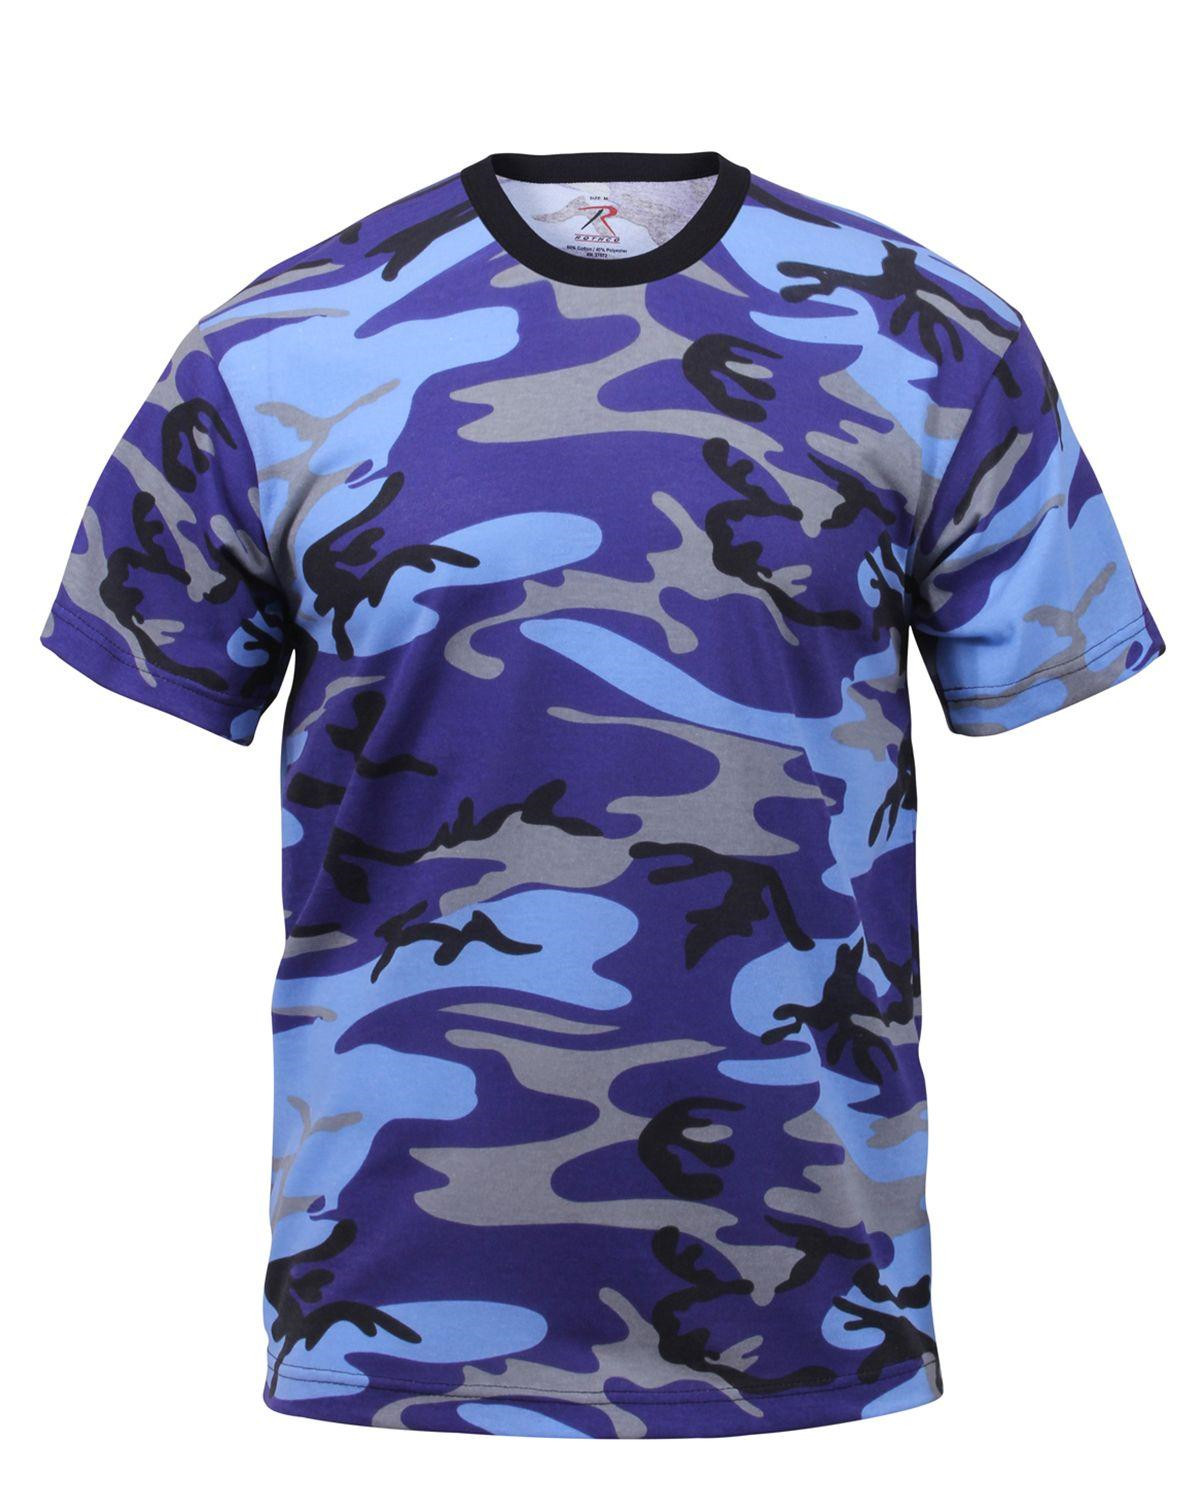 Rothco T-shirt - Mange Camouflager (Electric Blue Camo, S)